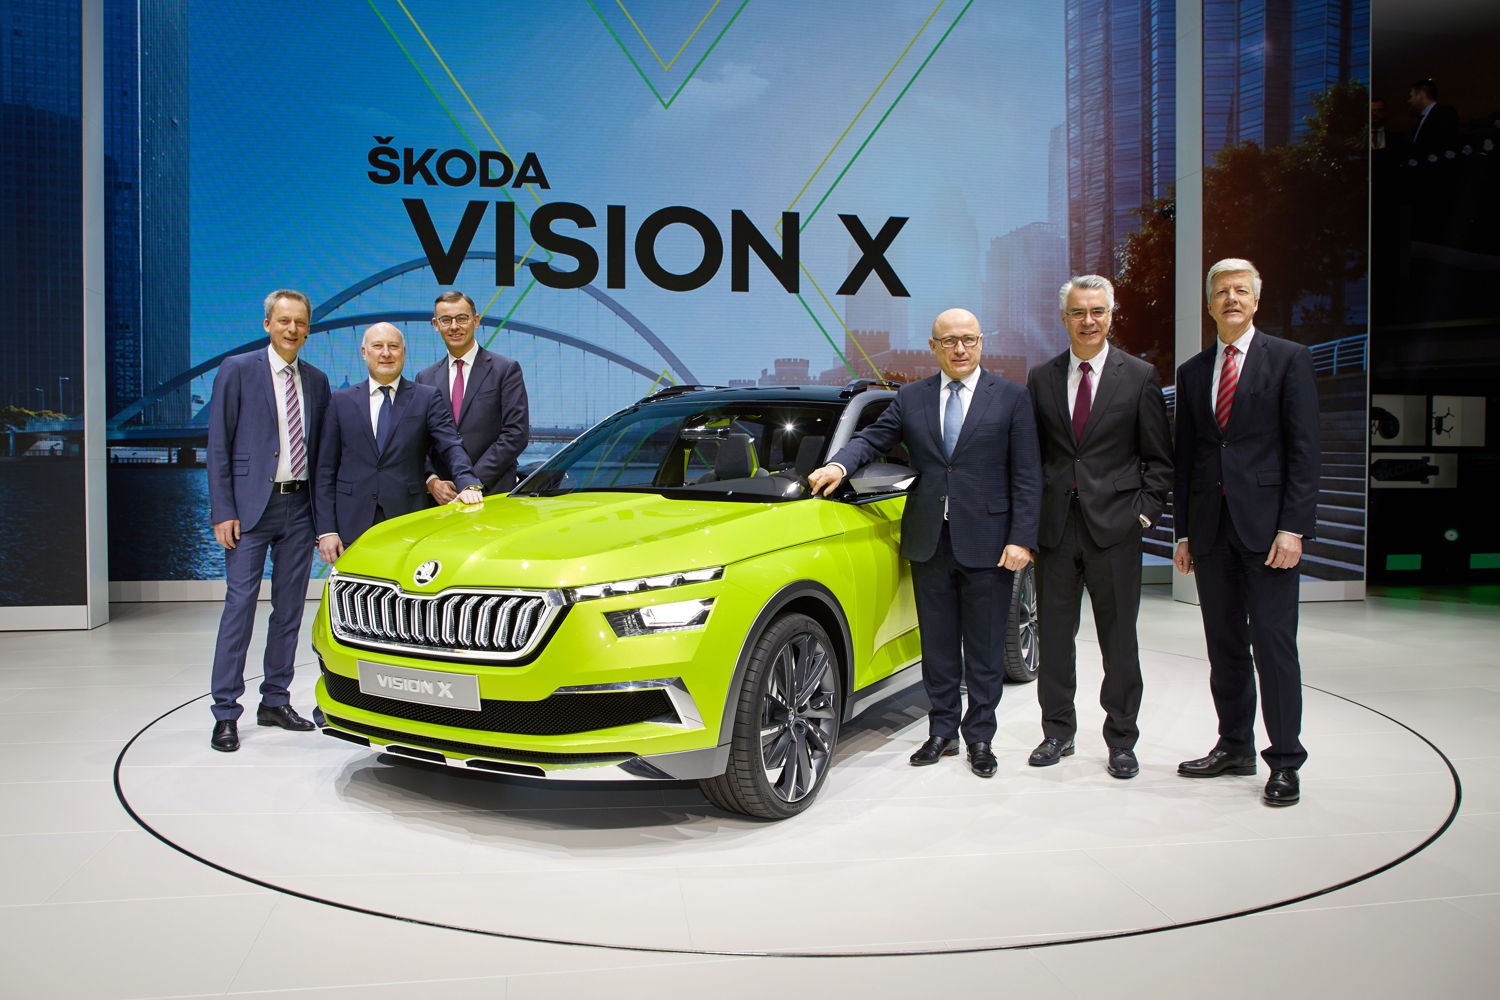 ŠKODA AUTO Board of Management at the press conference in Geneva on 6 March 2018.